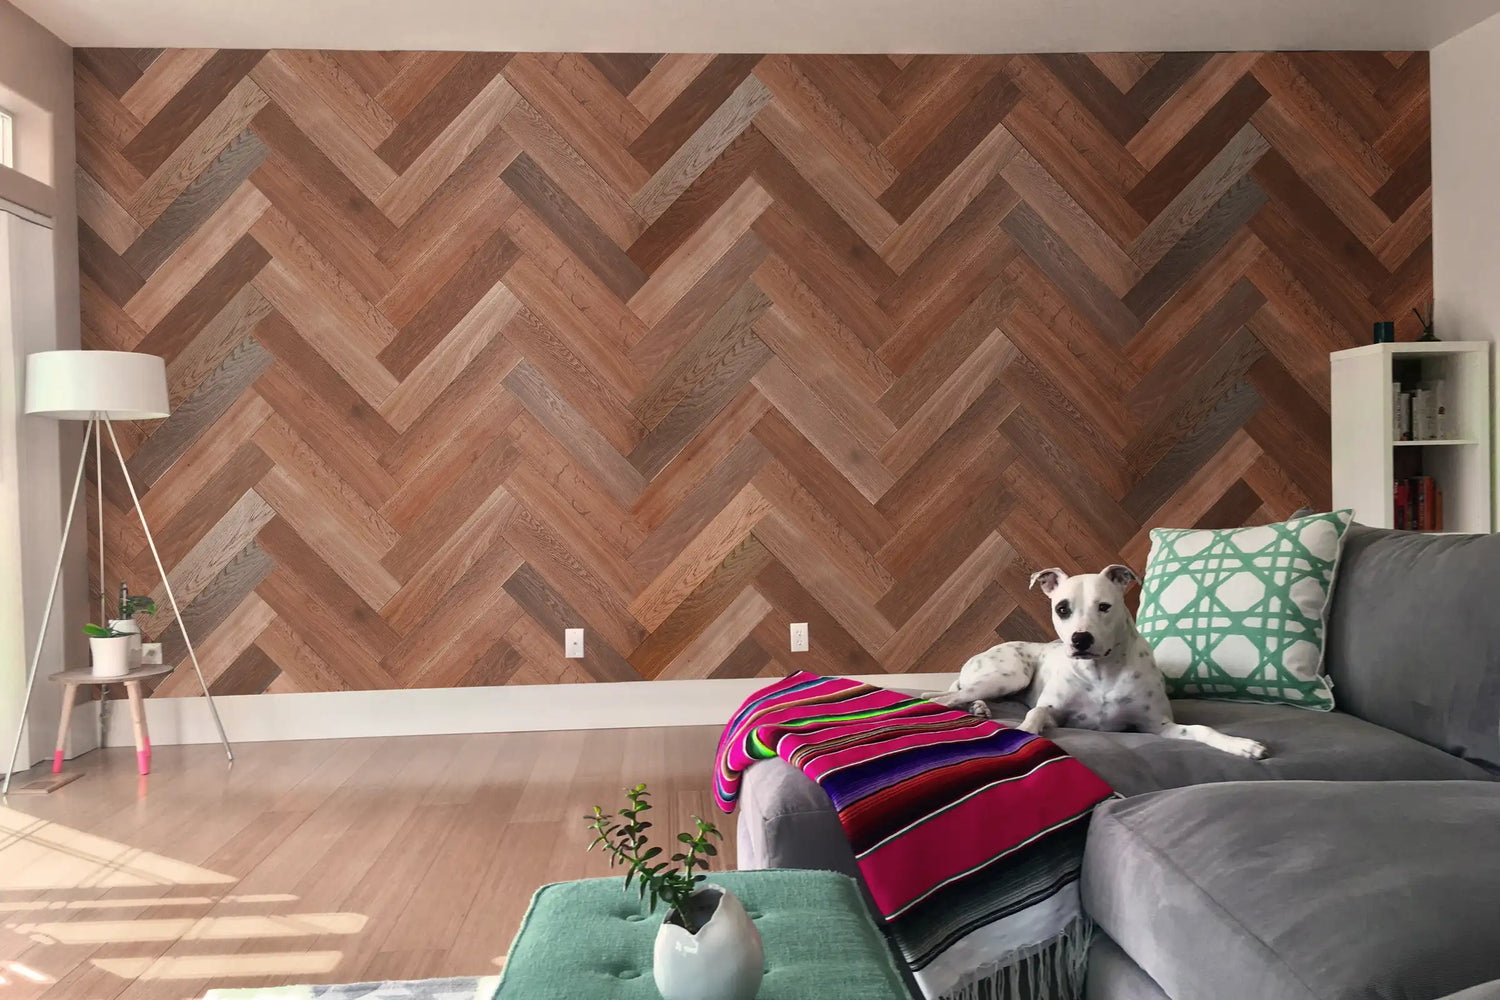 Seine white oak herringbone sustainable wood planking accent wall from WD Walls